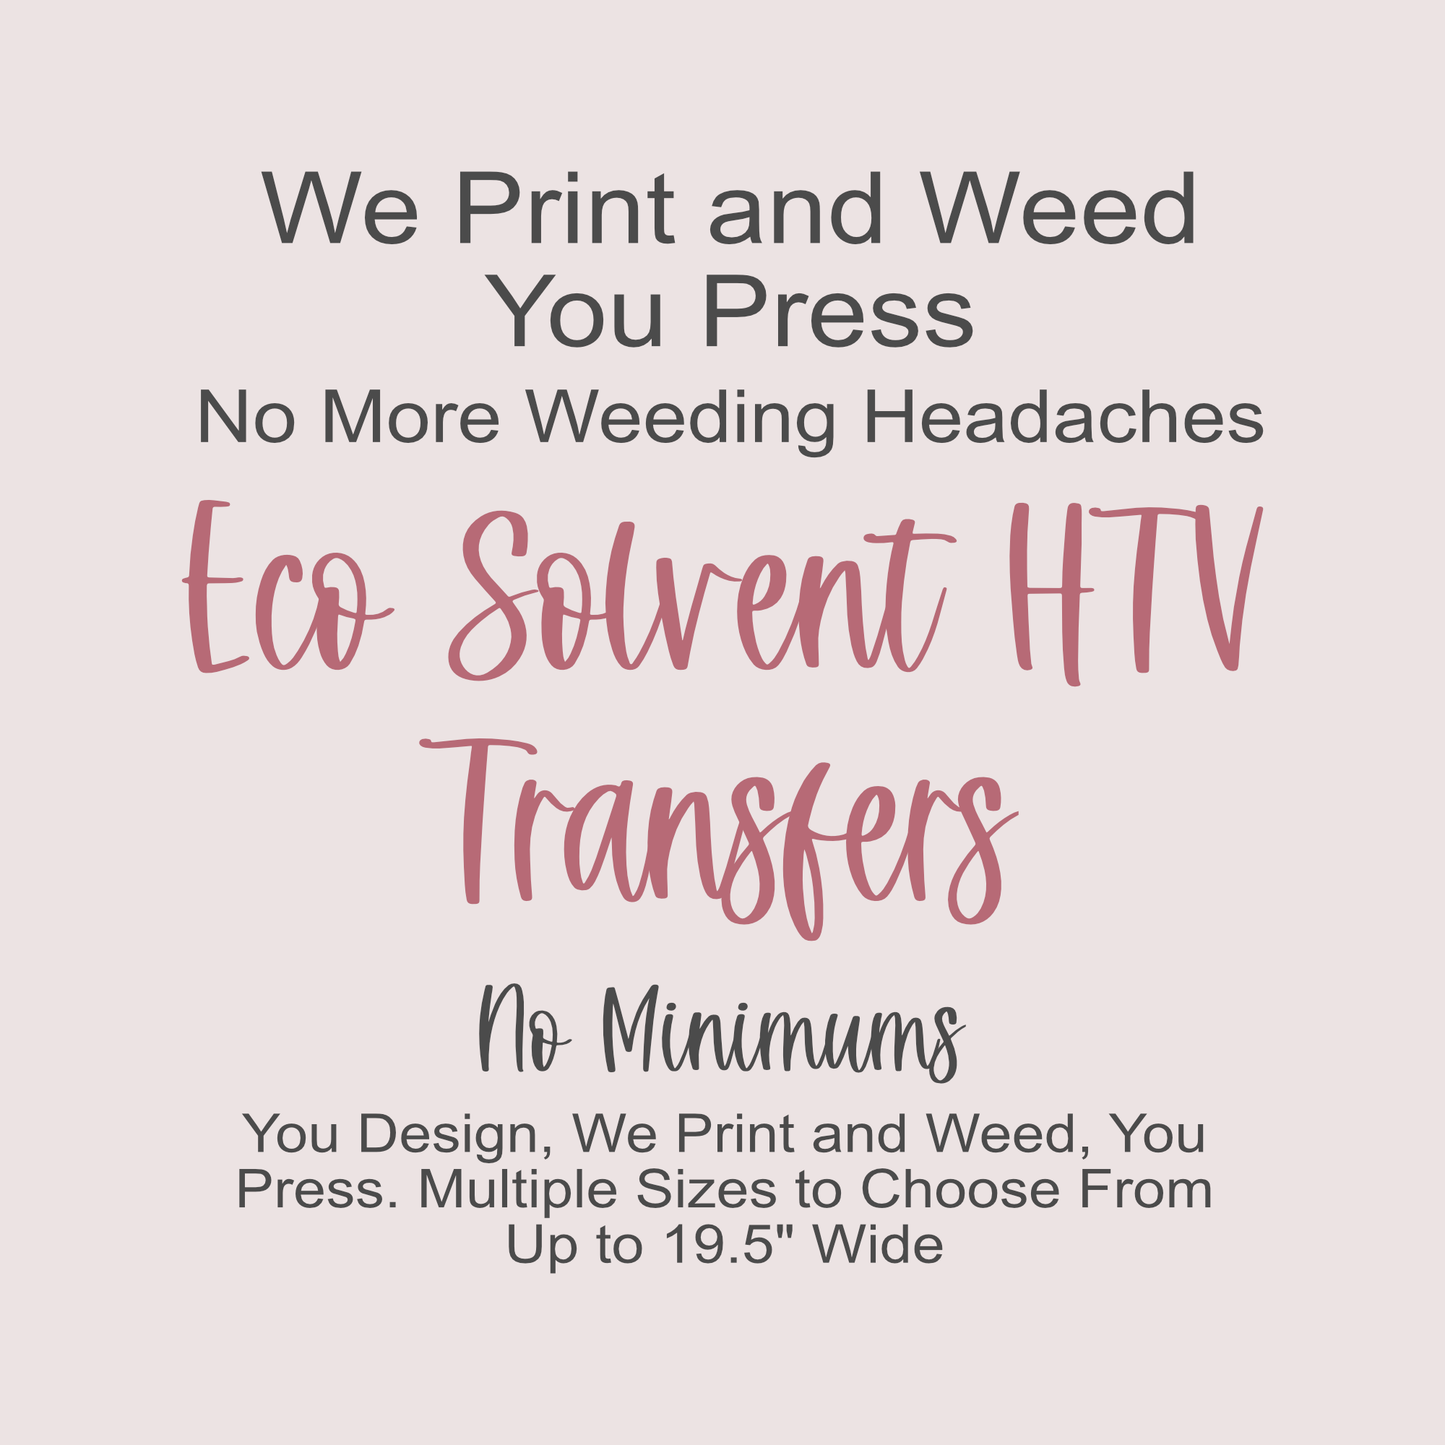 Custom HTV Transfers | We Print and Weed Your Designs | Prints Up To 18.5" Wide | Eco Solvent Prints